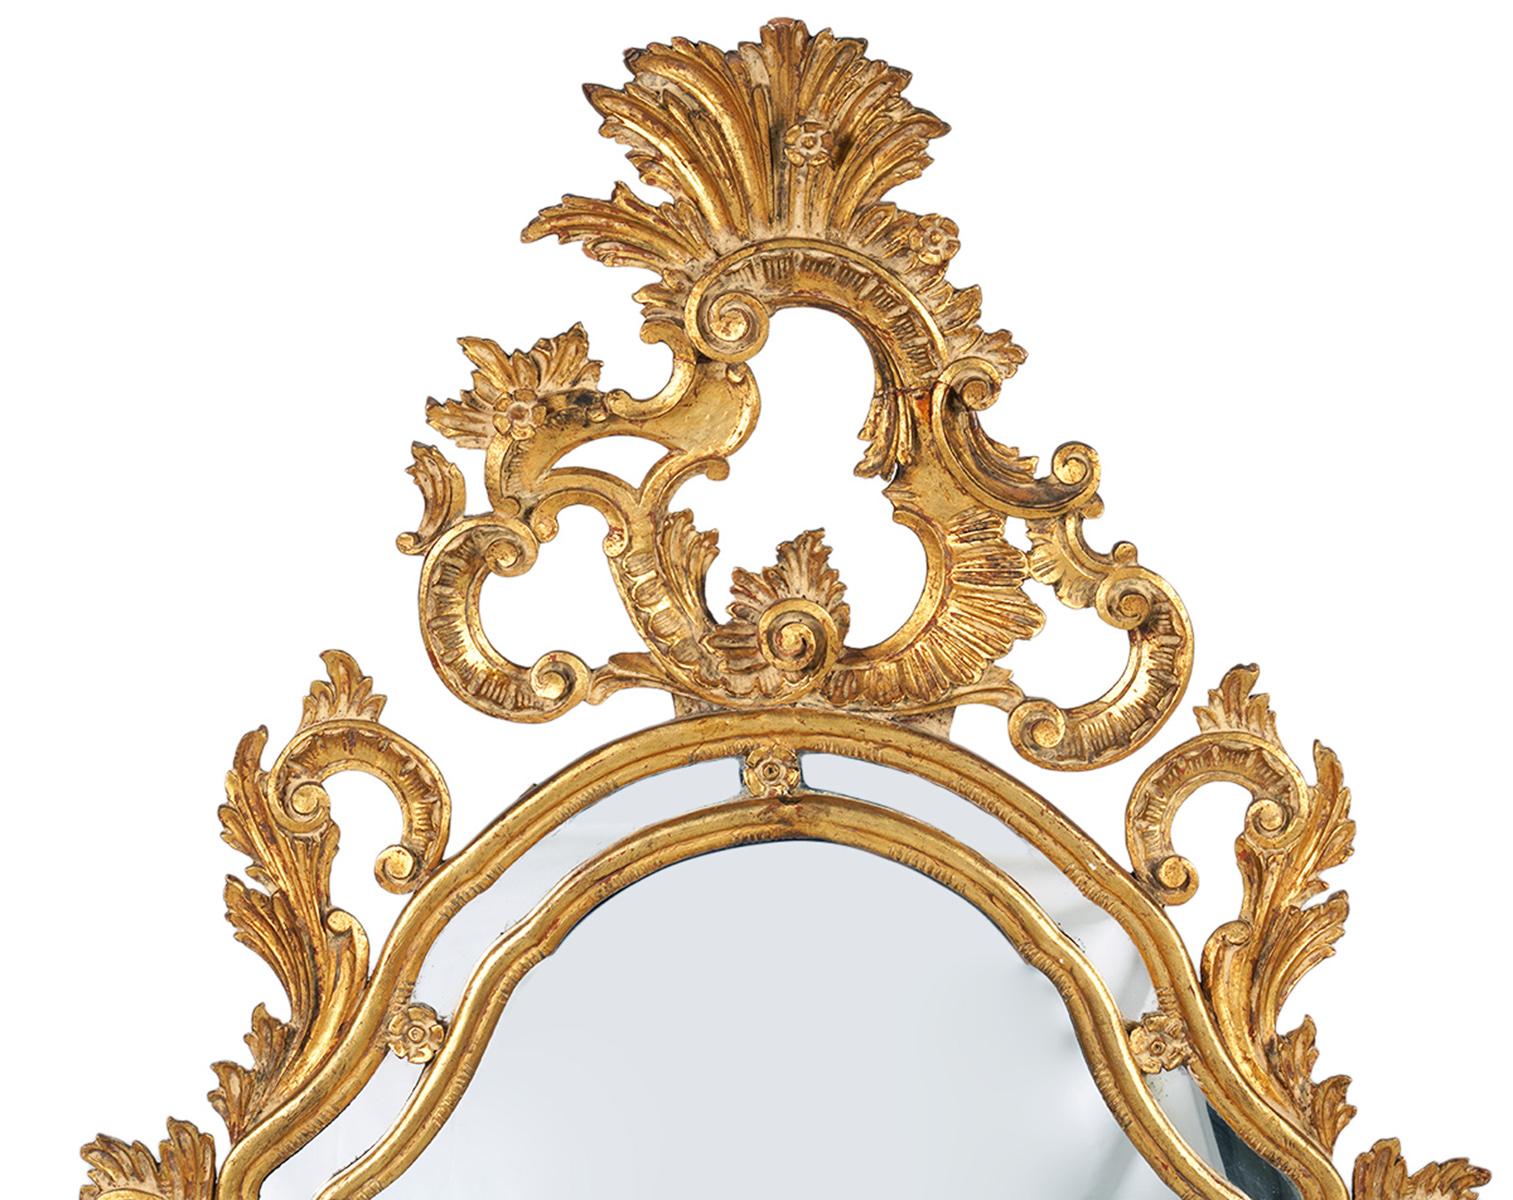 Grandiosely fashioned and carved in the rococo style this giltwood mirror features a plethora of scrolls and leaf work surmonted by a sunburst style crest. The main mirror is surrounded by shaped mirrored panels creating an elegant and lightfilled